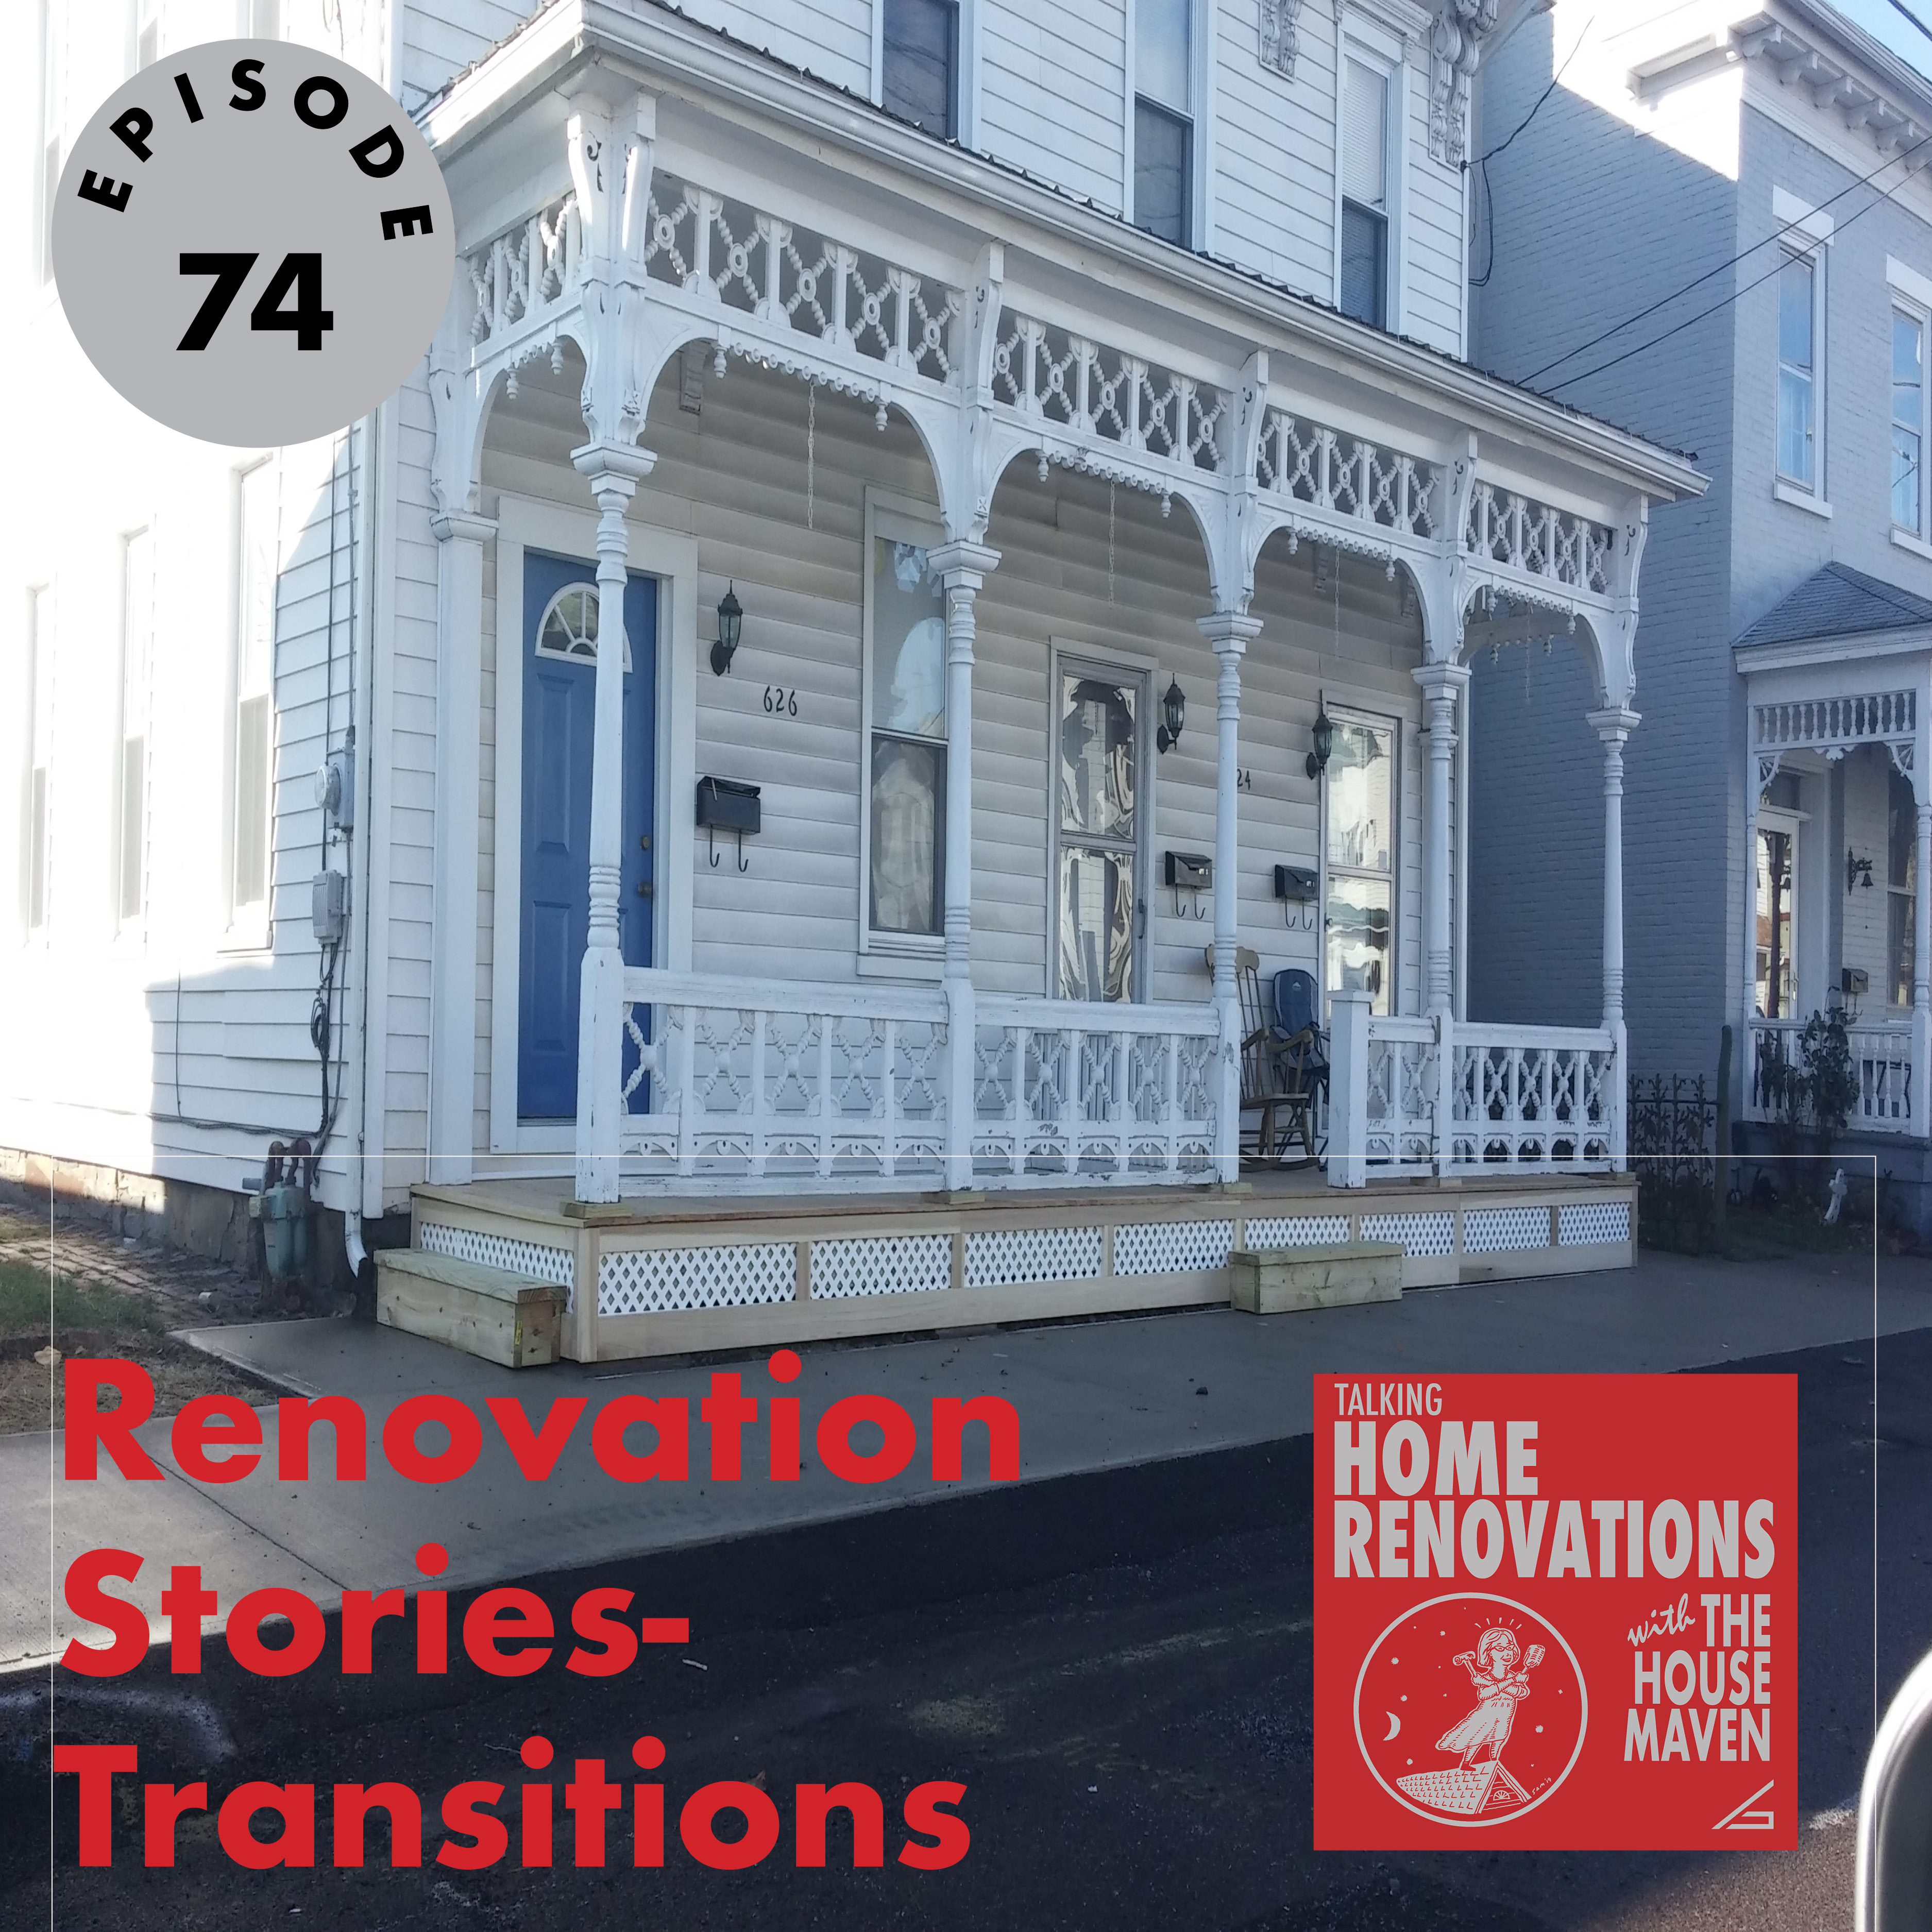 Cover graphic for Episode 74 of Talking Home Renovations, "Renovation Stories - Transitions". The background is a photo of a house with an ornate front porch, with lots of detailed trim. The red Talking Home Renovations logo appears in the bottom right corner.